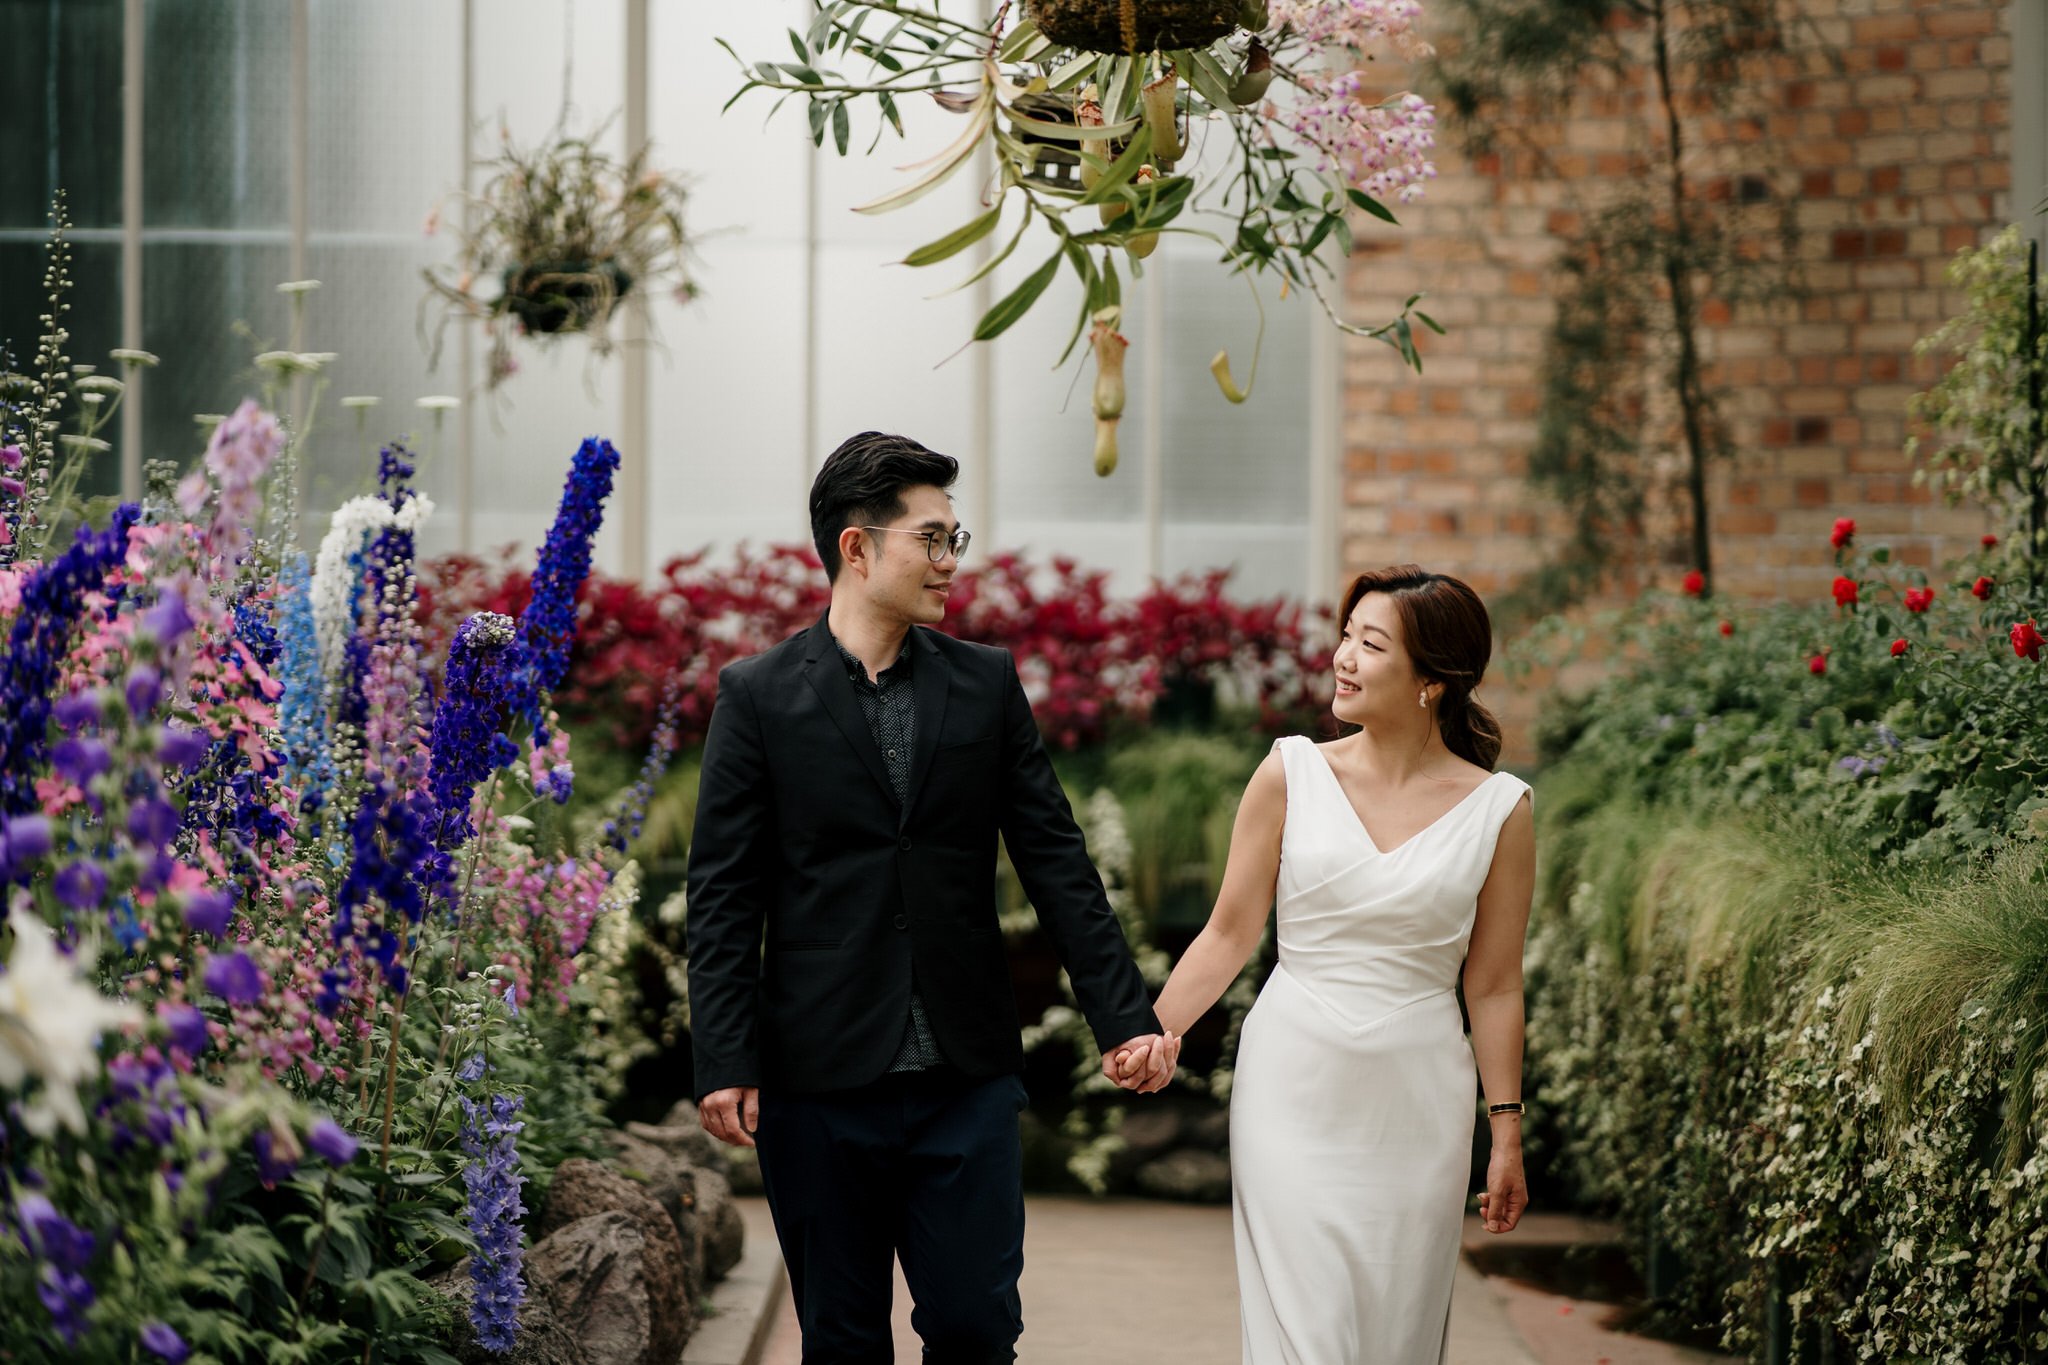 auckland-wedding-photographer-videographer-story-by-koo-koo's-jewelry-dear-white-productions-pre-wedding-engagement-photo-glass-house-botanic-fernery-garden (19).JPG